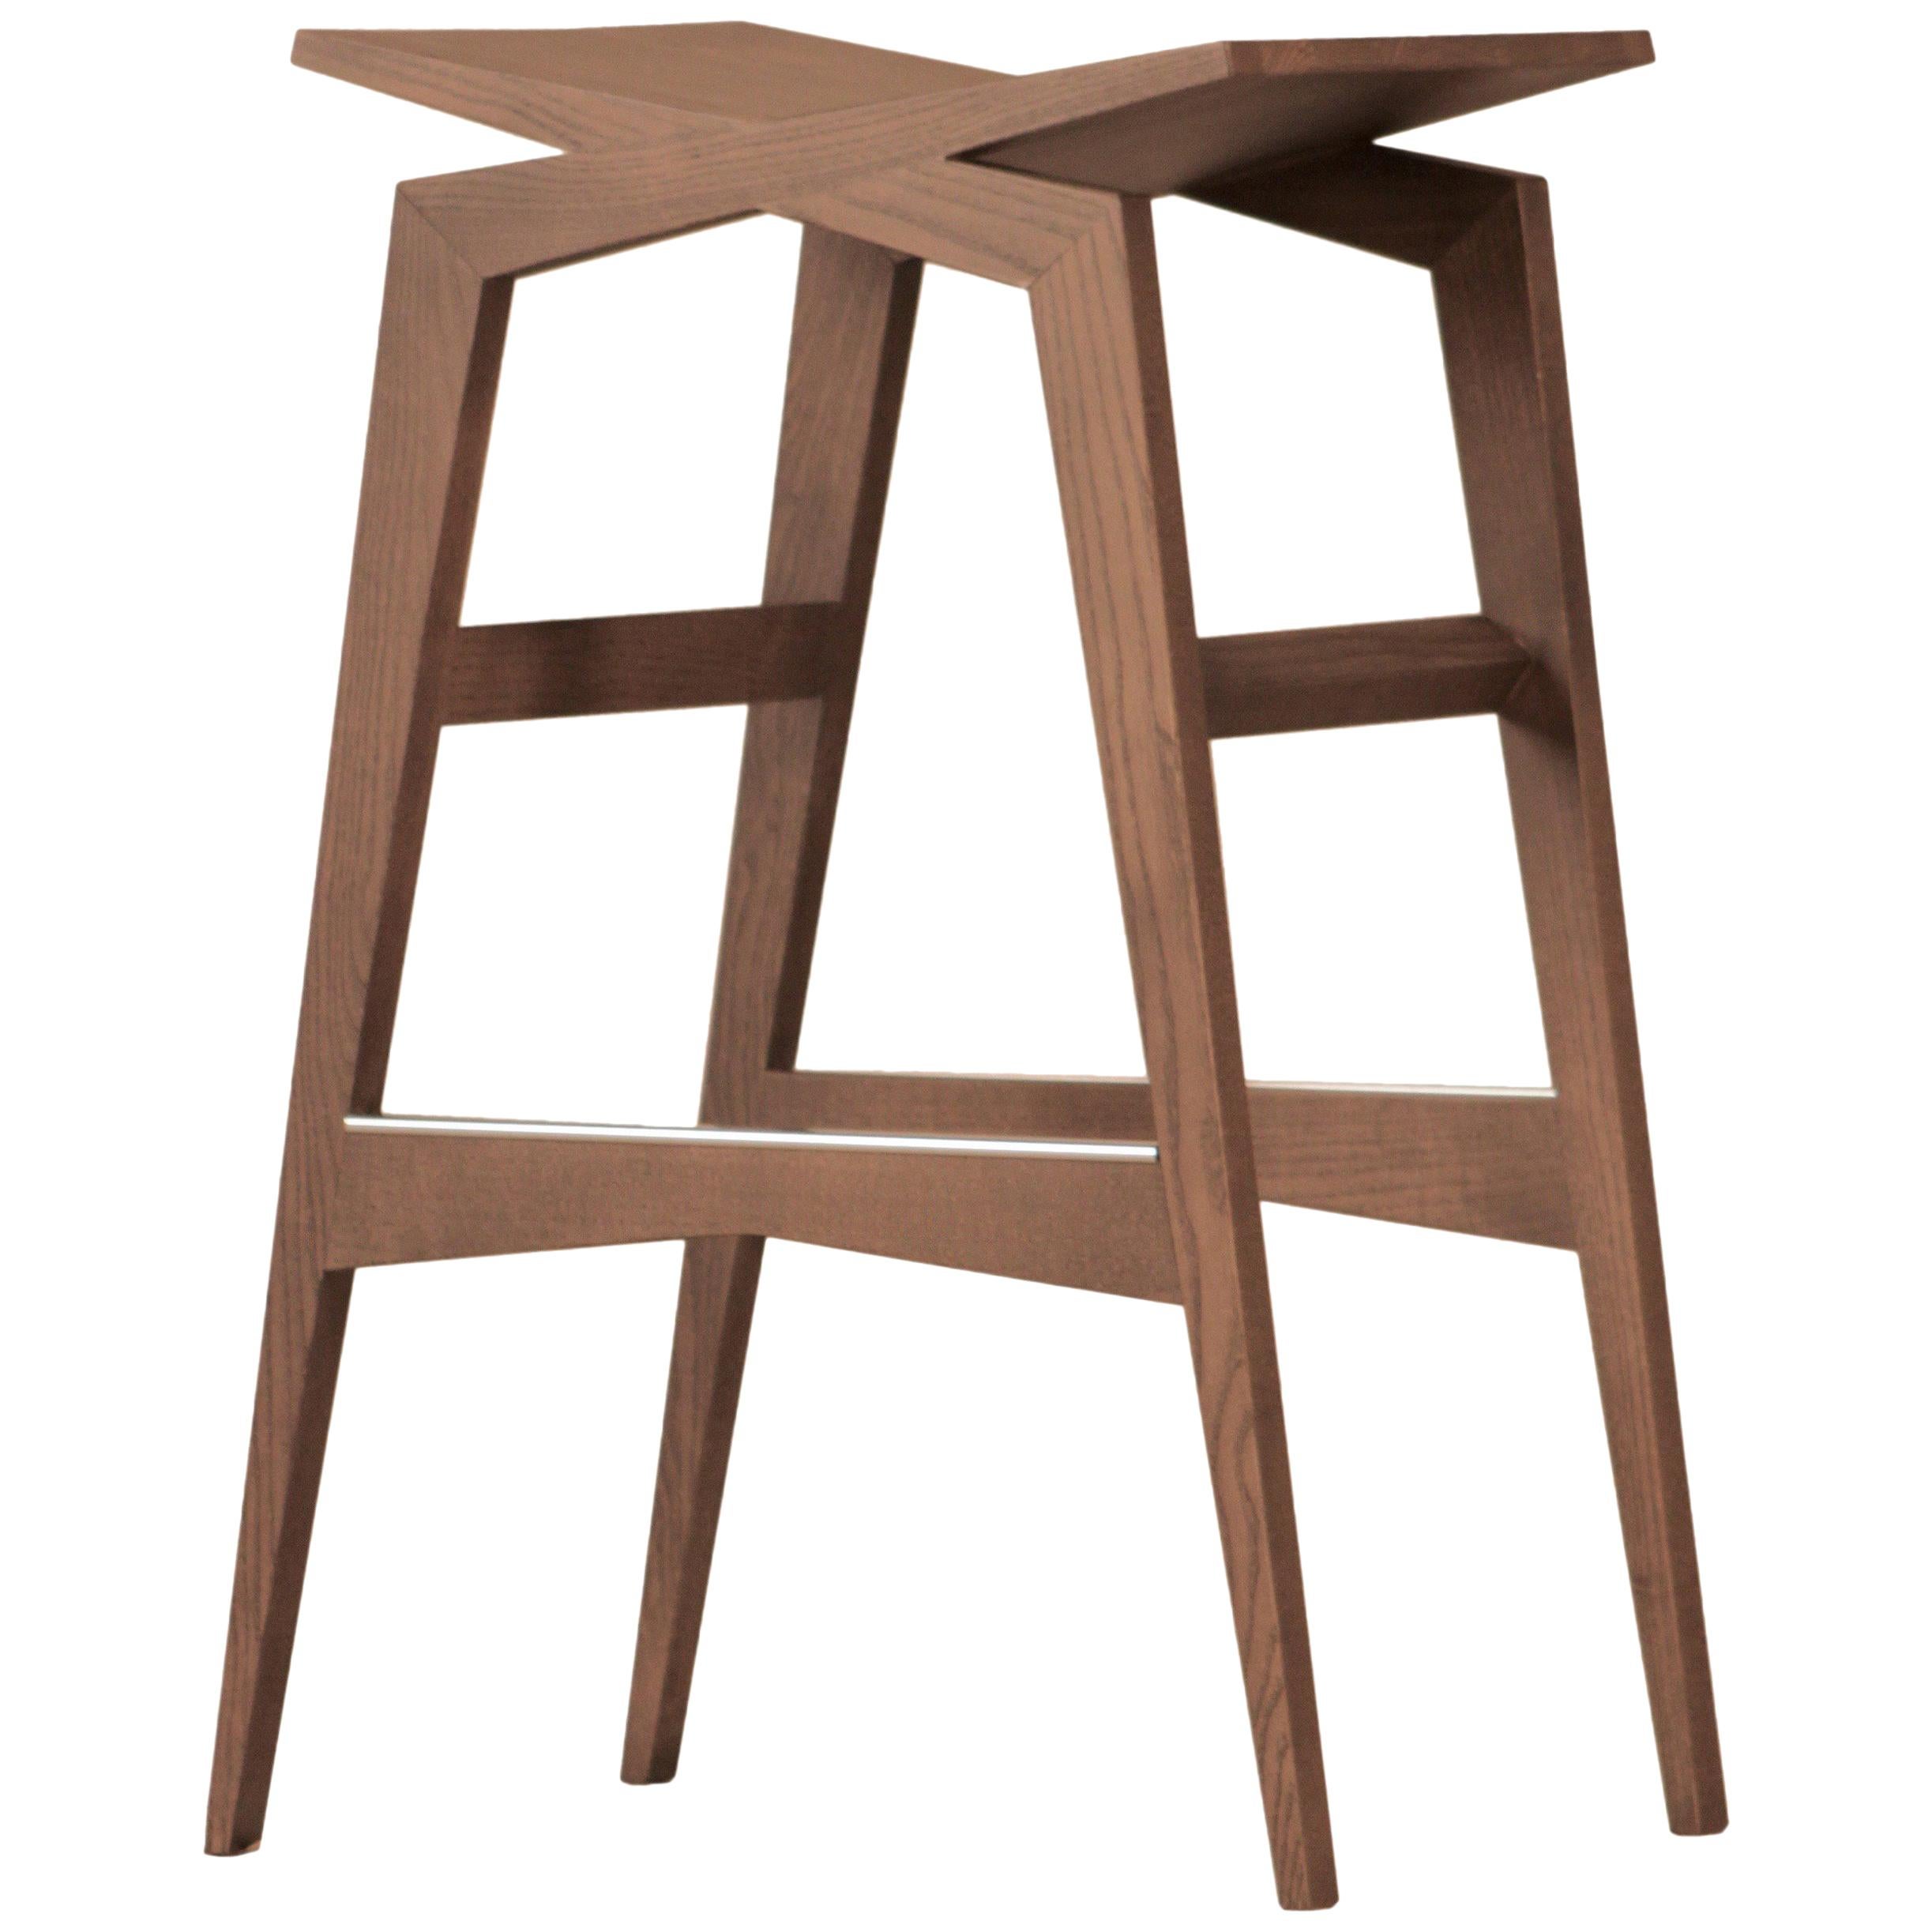 Icaro, Contemporary Bar Stool Made of Solid Ashwood, by Morelato For Sale